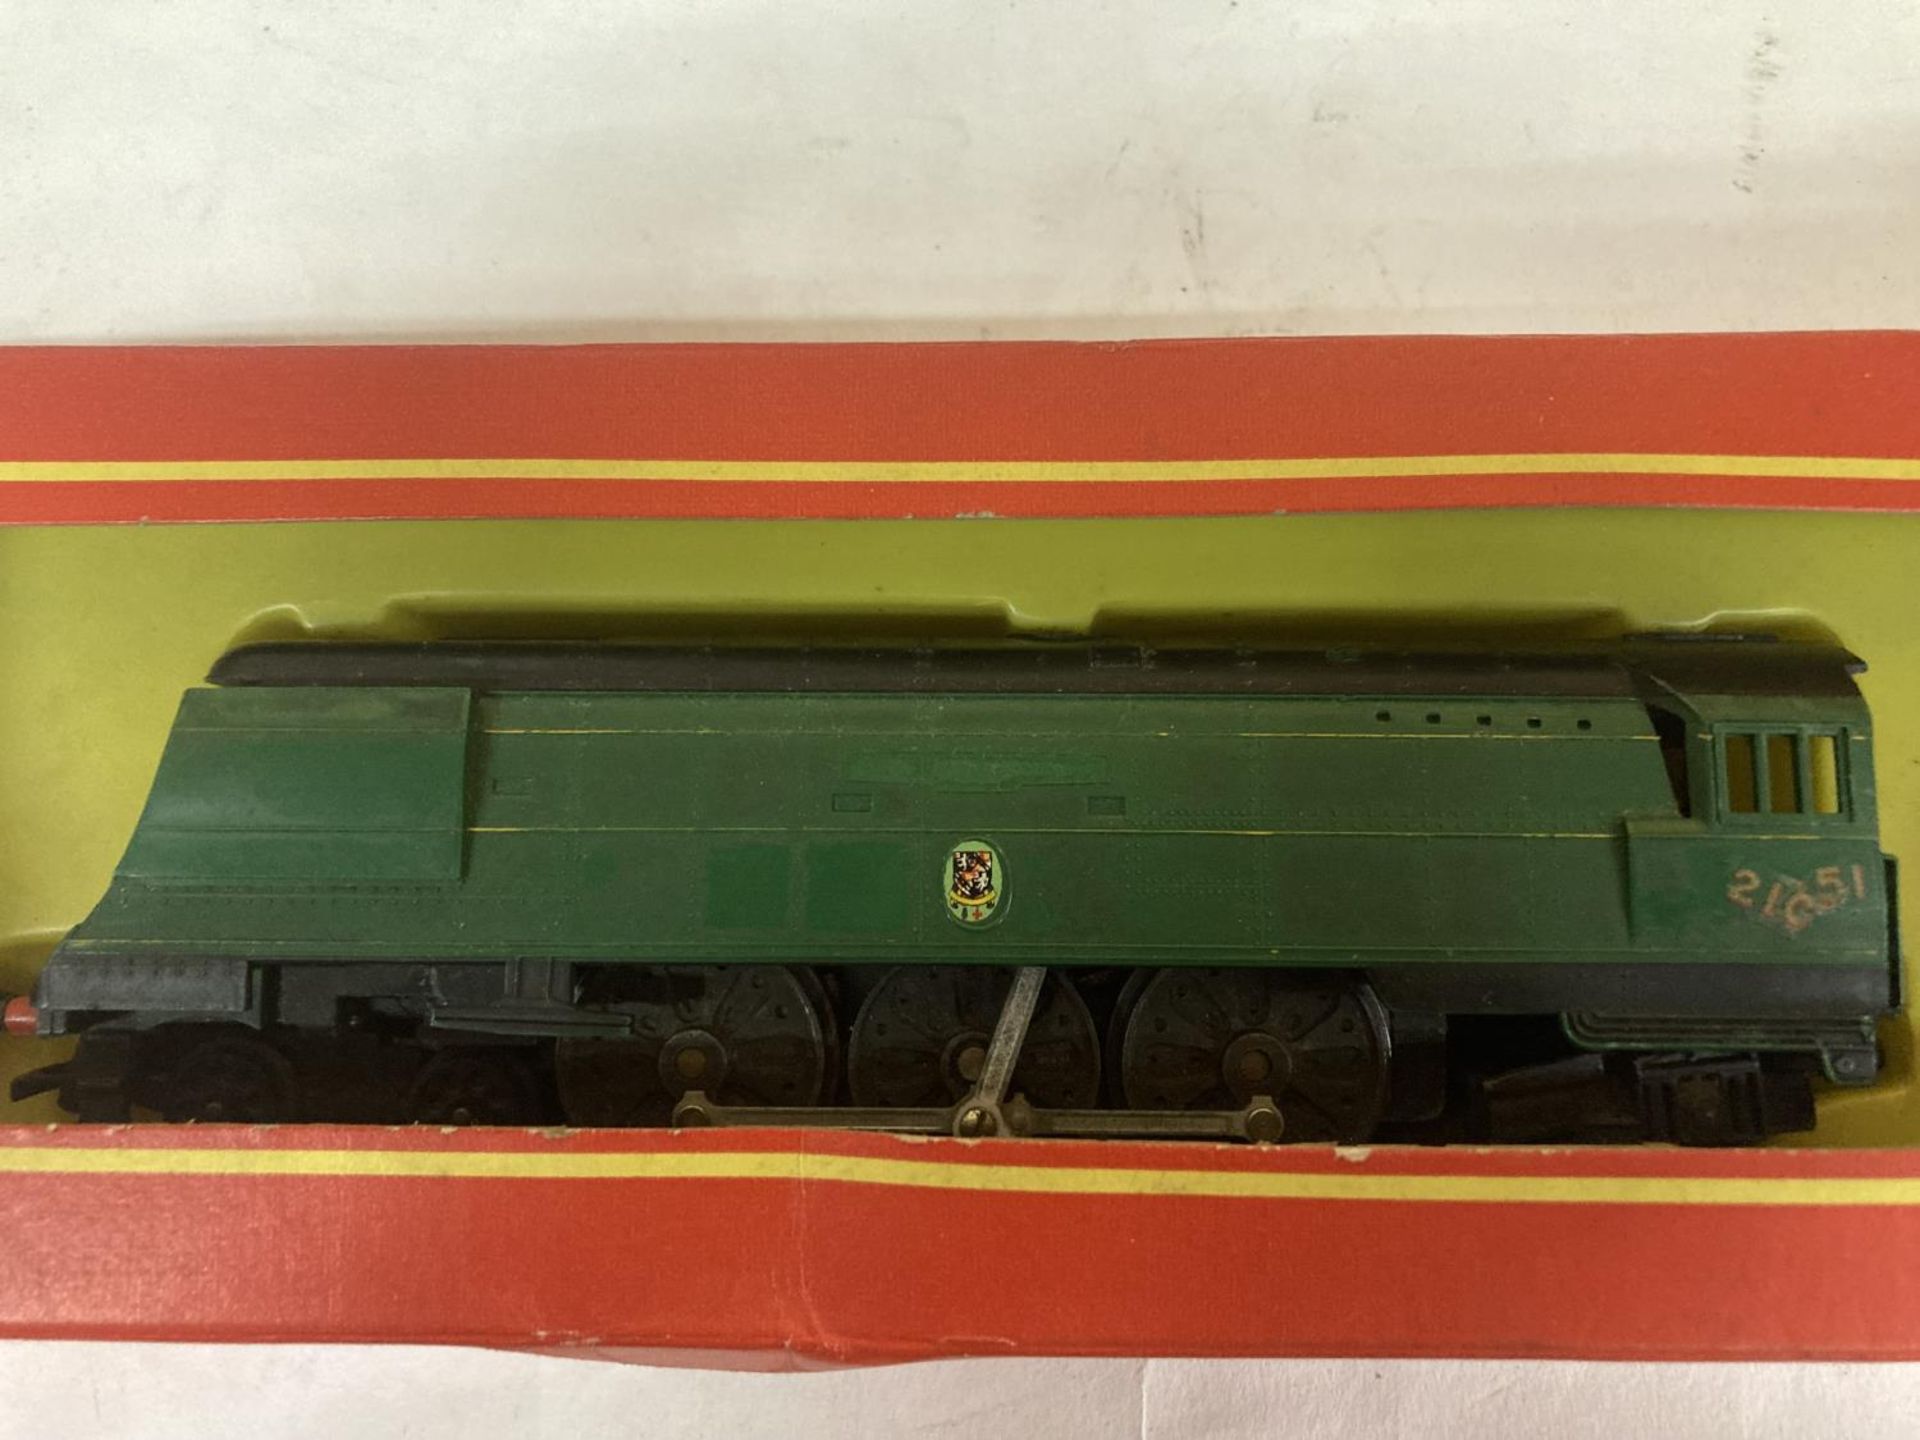 A TRI-ANG HORNBY MODEL OF SOUTHERN GOLDEN ARROW 4-6-2 LOCOMOTIVE WINSTON CHURCHILL IN BOX - Image 3 of 6